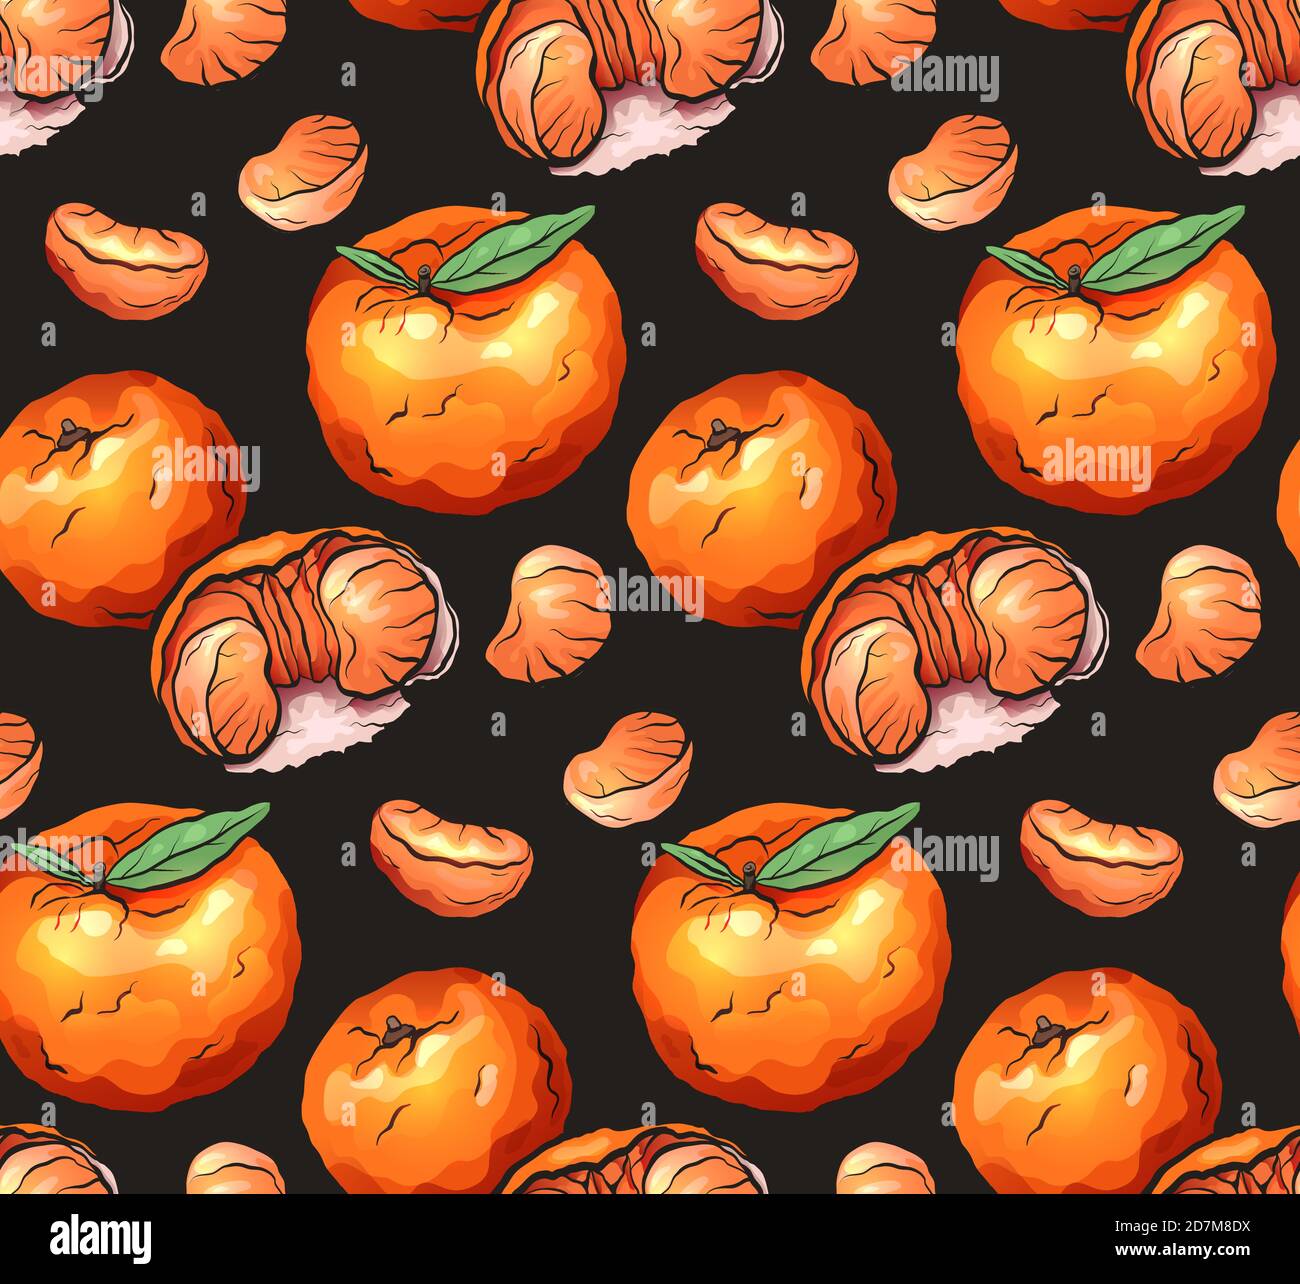 Seamless texture with cartoon orange tangerines with slices on a dark background. Vector pattern for fabrics, backgrounds and your design. Stock Vector